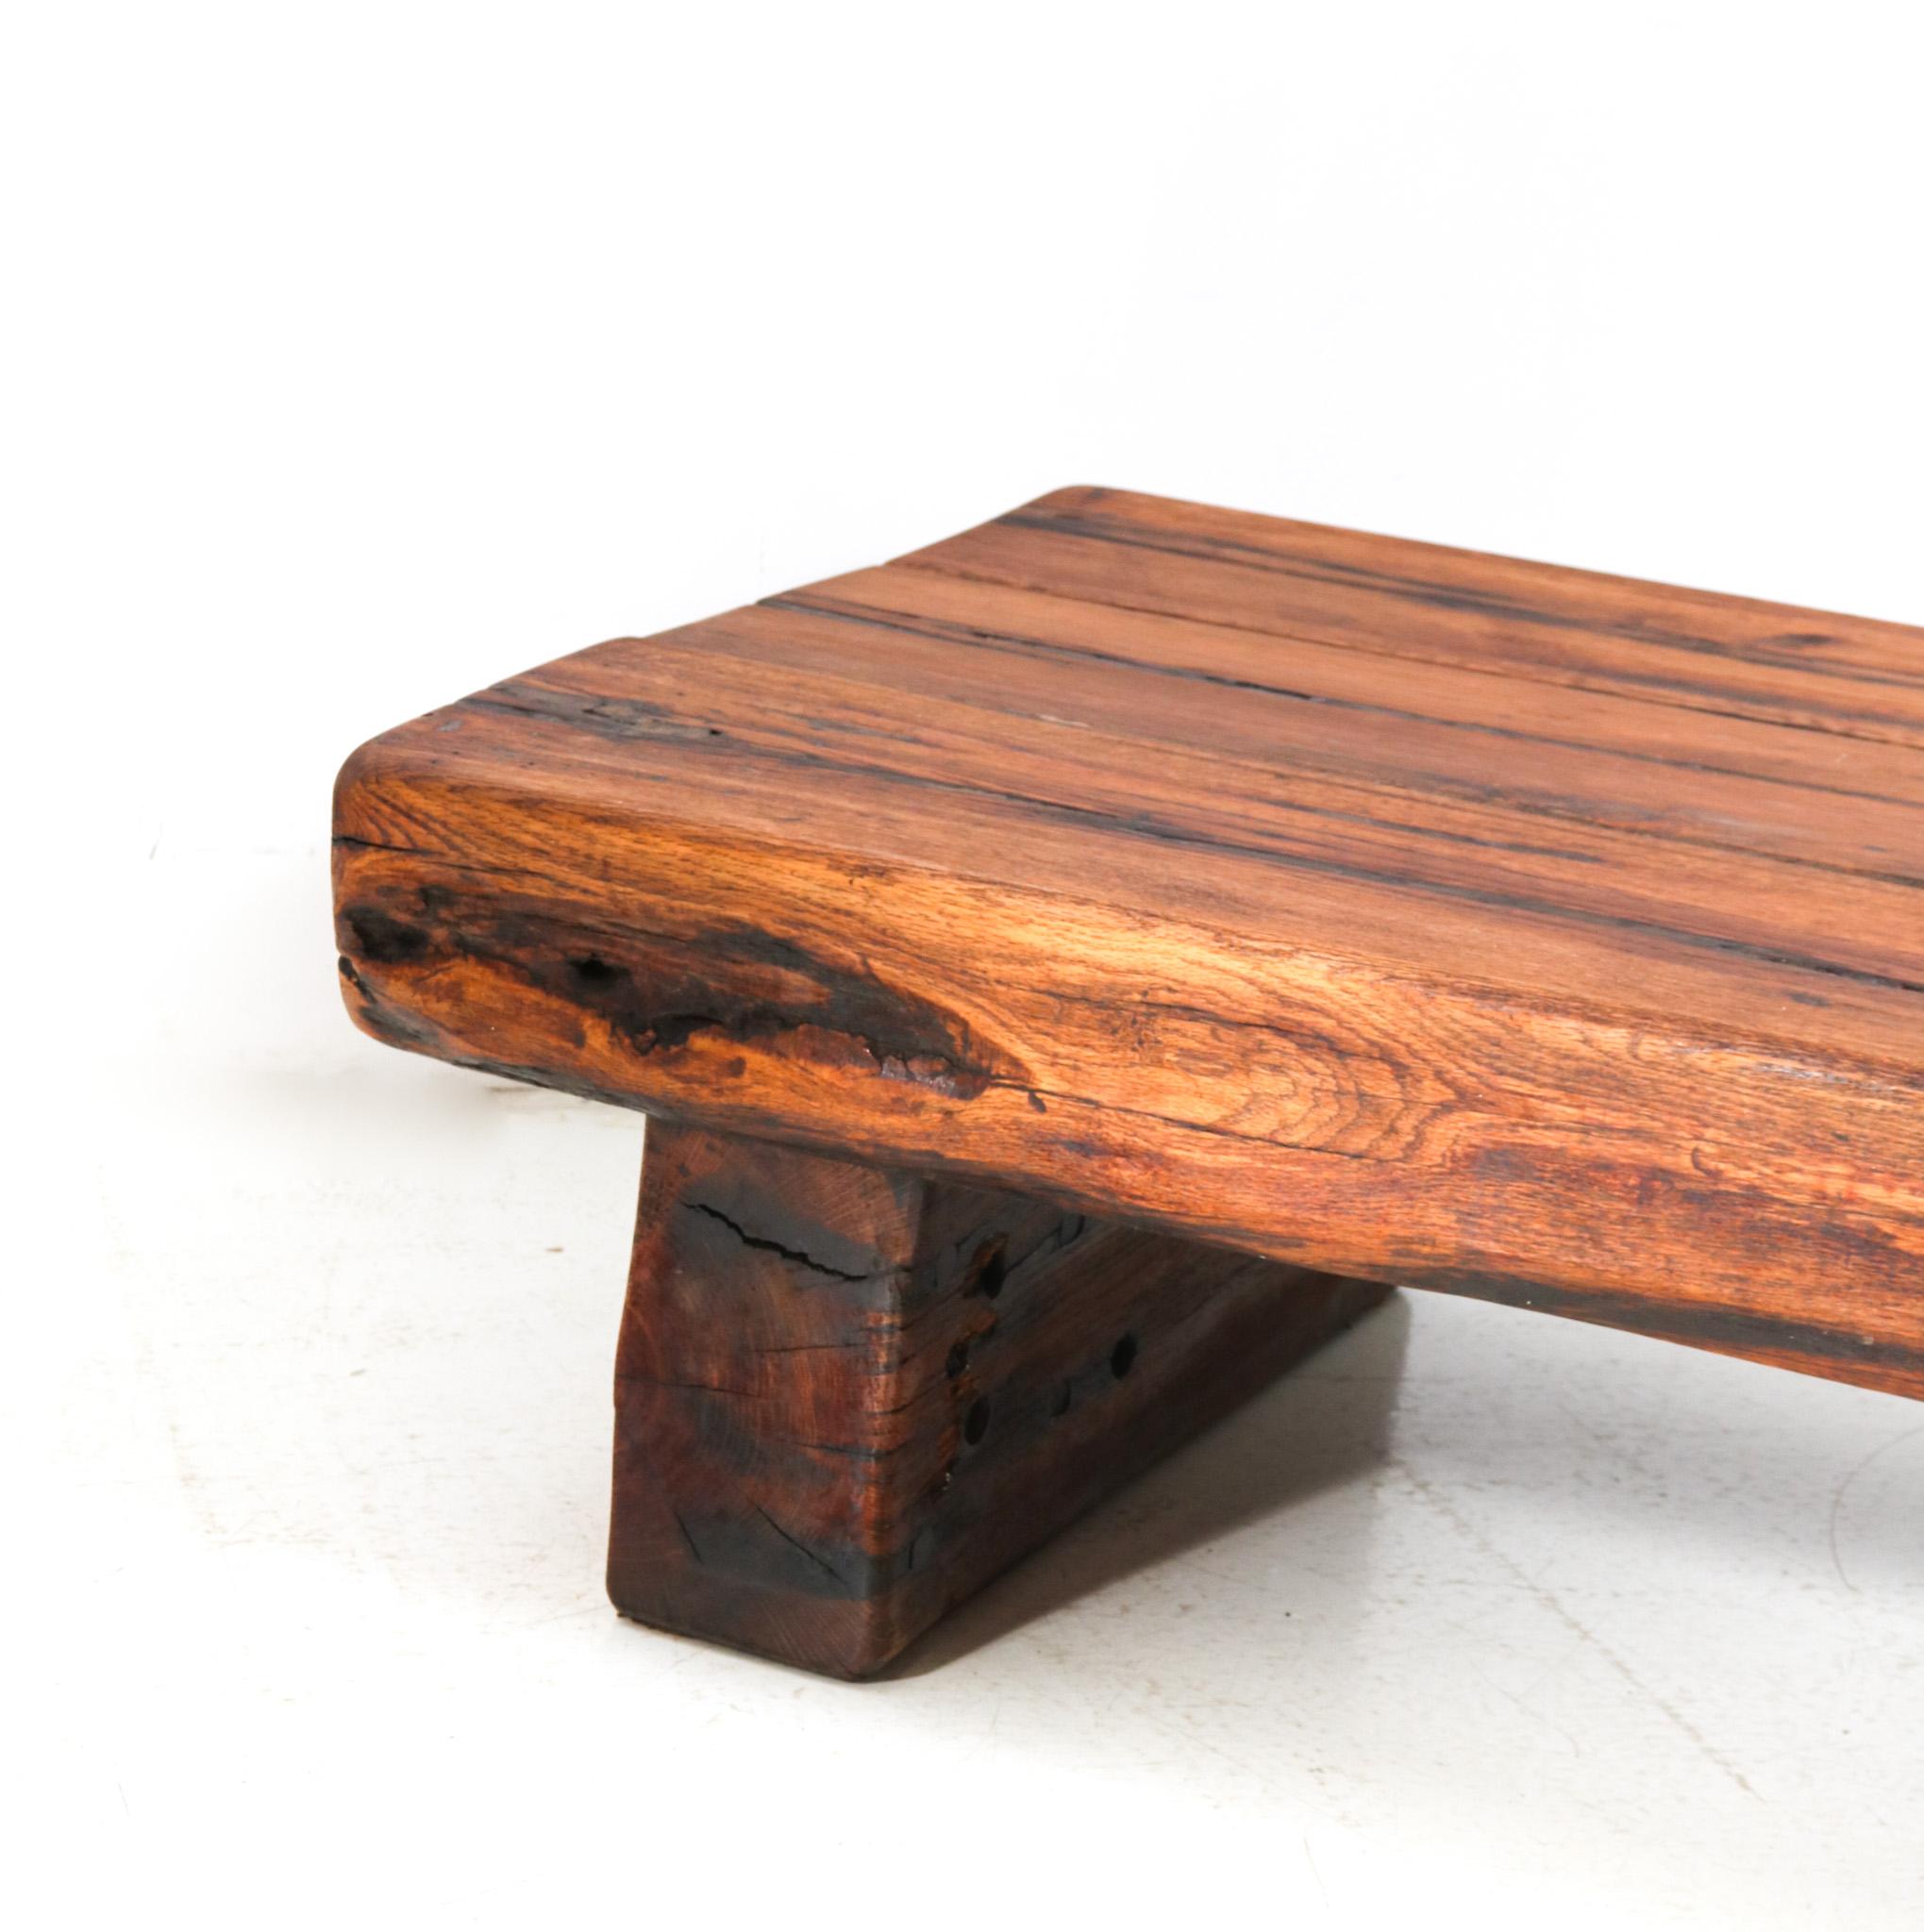 Oak Brutalist Rustic Coffee Table or Cocktail Table, 1960s For Sale 3